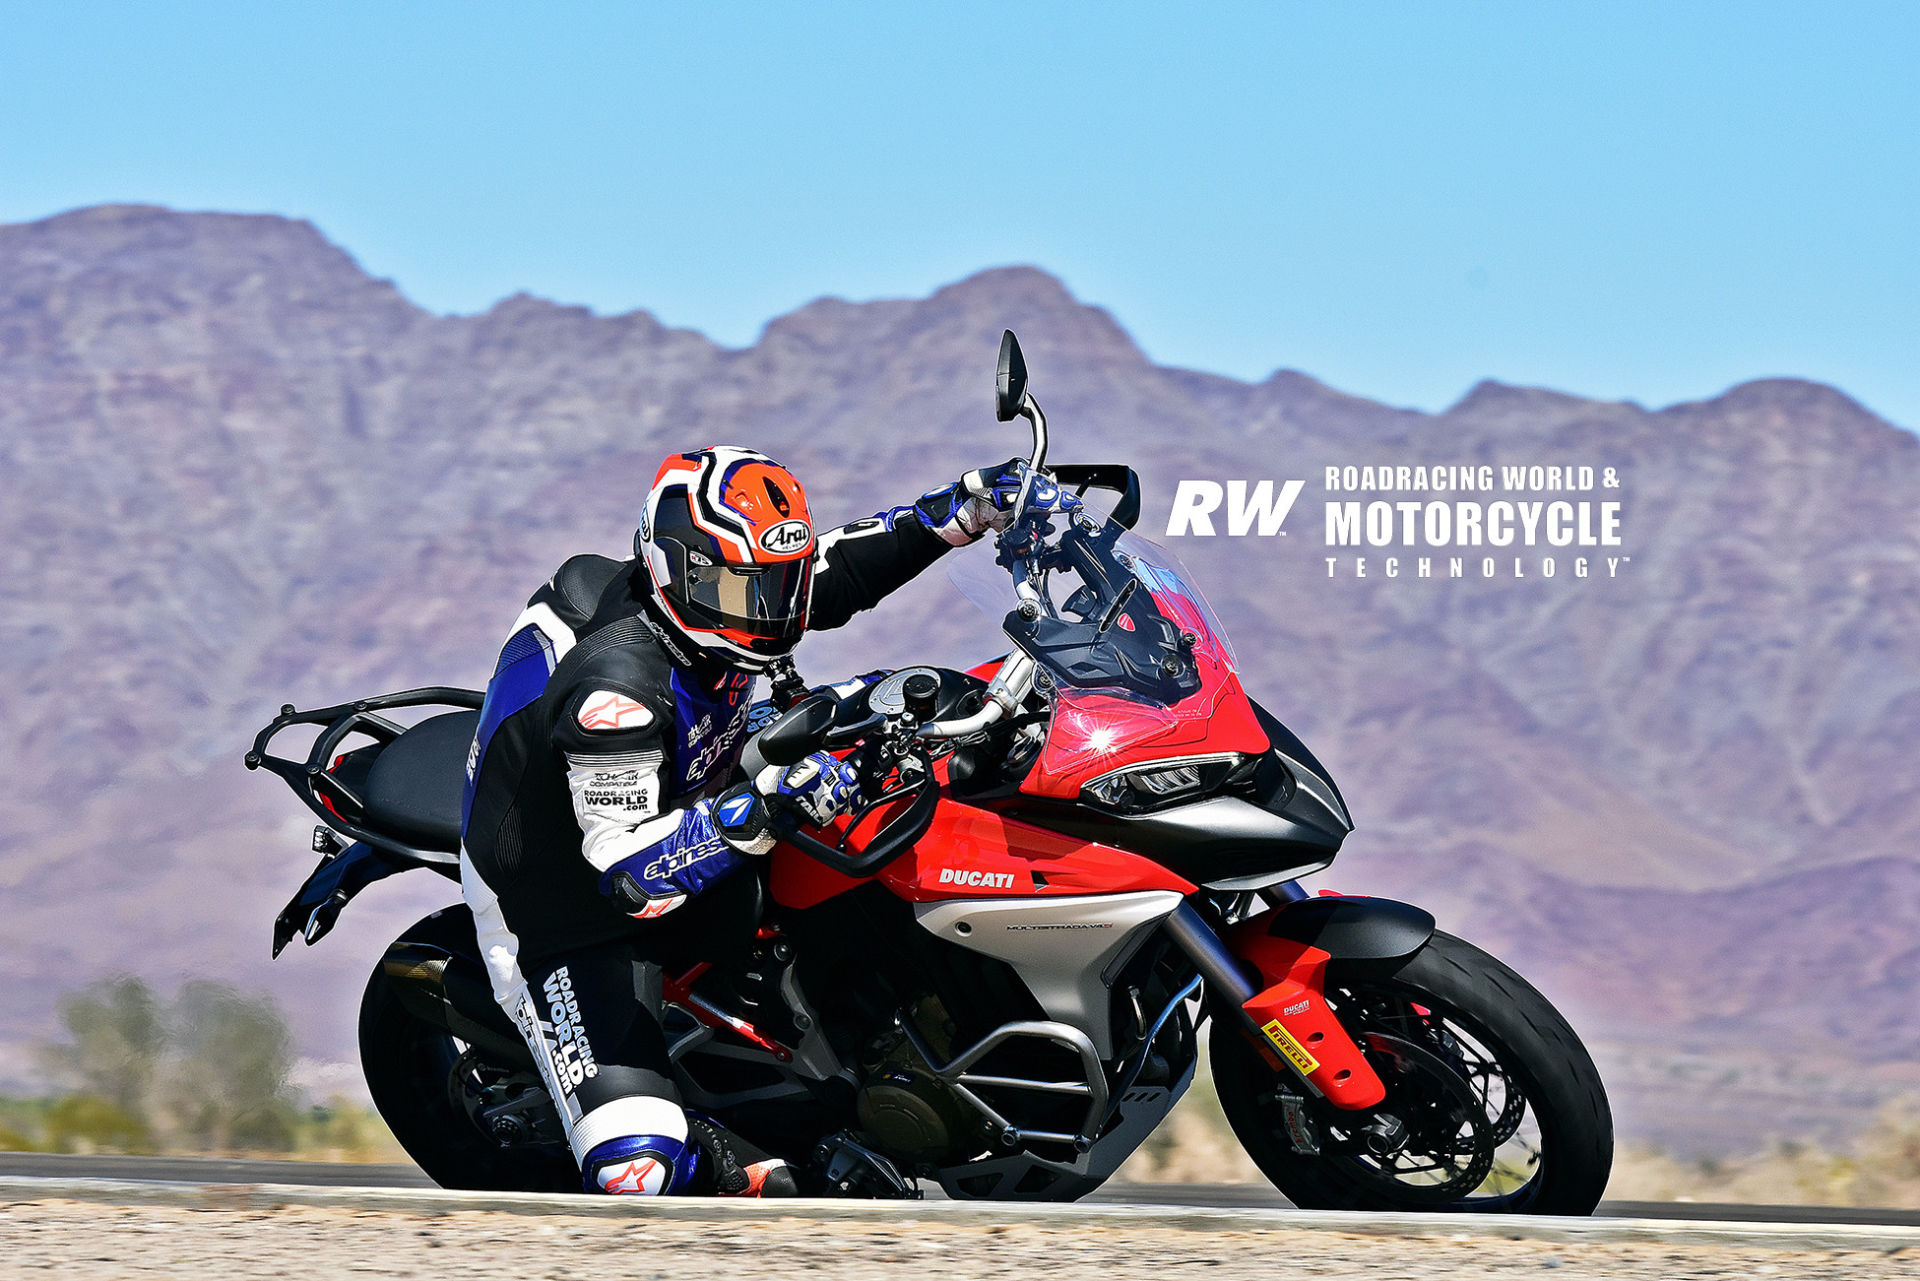 Chris Ulrich rails the Ducati Multistrada on the Chuckwalla Valley Raceway road course, on stock on/off-road tires. Photo by Michael Gougis.